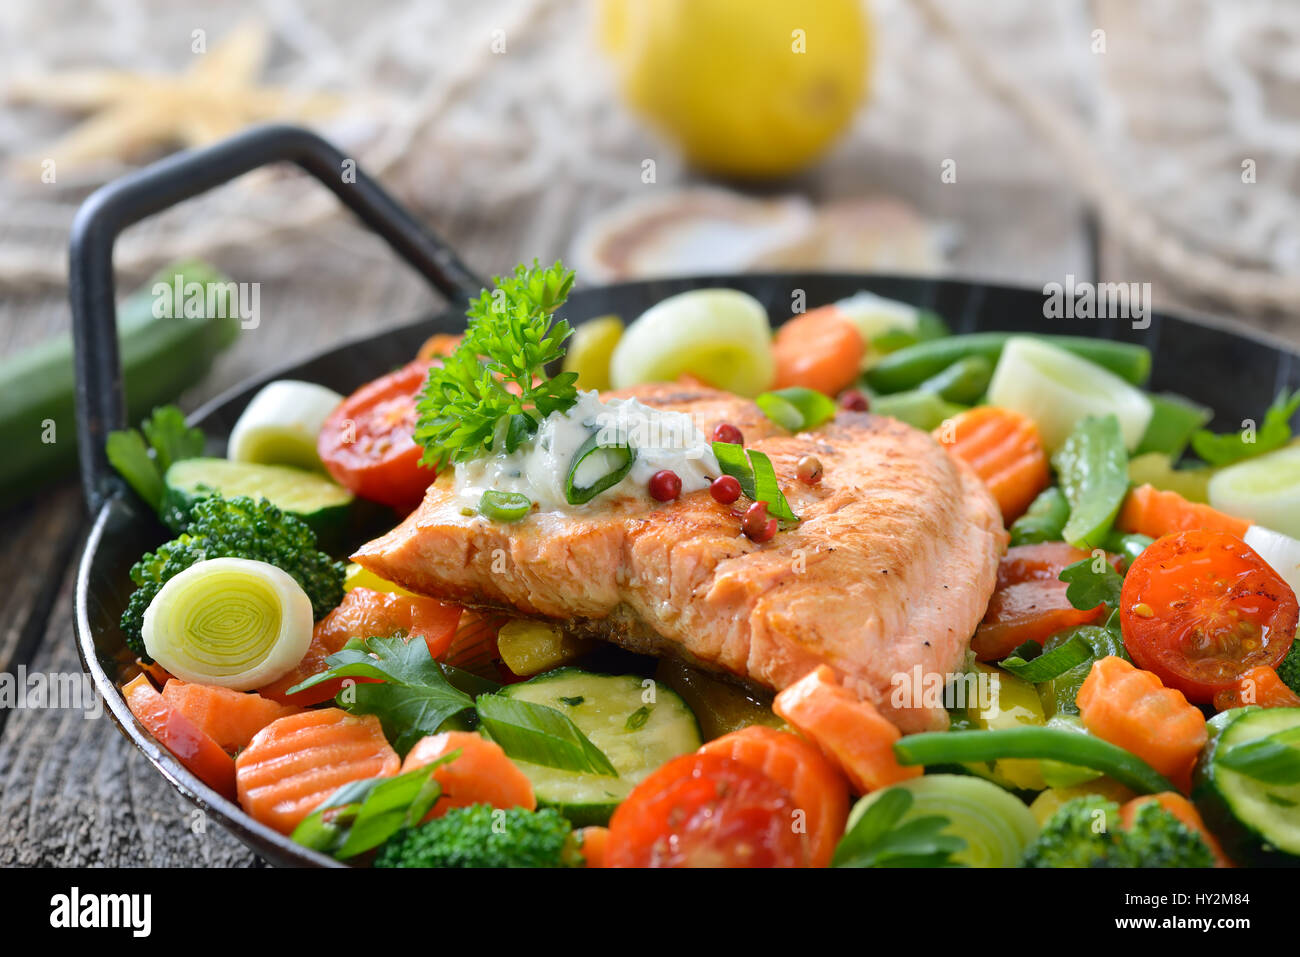 Fried salmon fillet on mixed colorful vegetables served in a frying pan,  a lemon and a fishing net with a starfish and seashells in the background Stock Photo